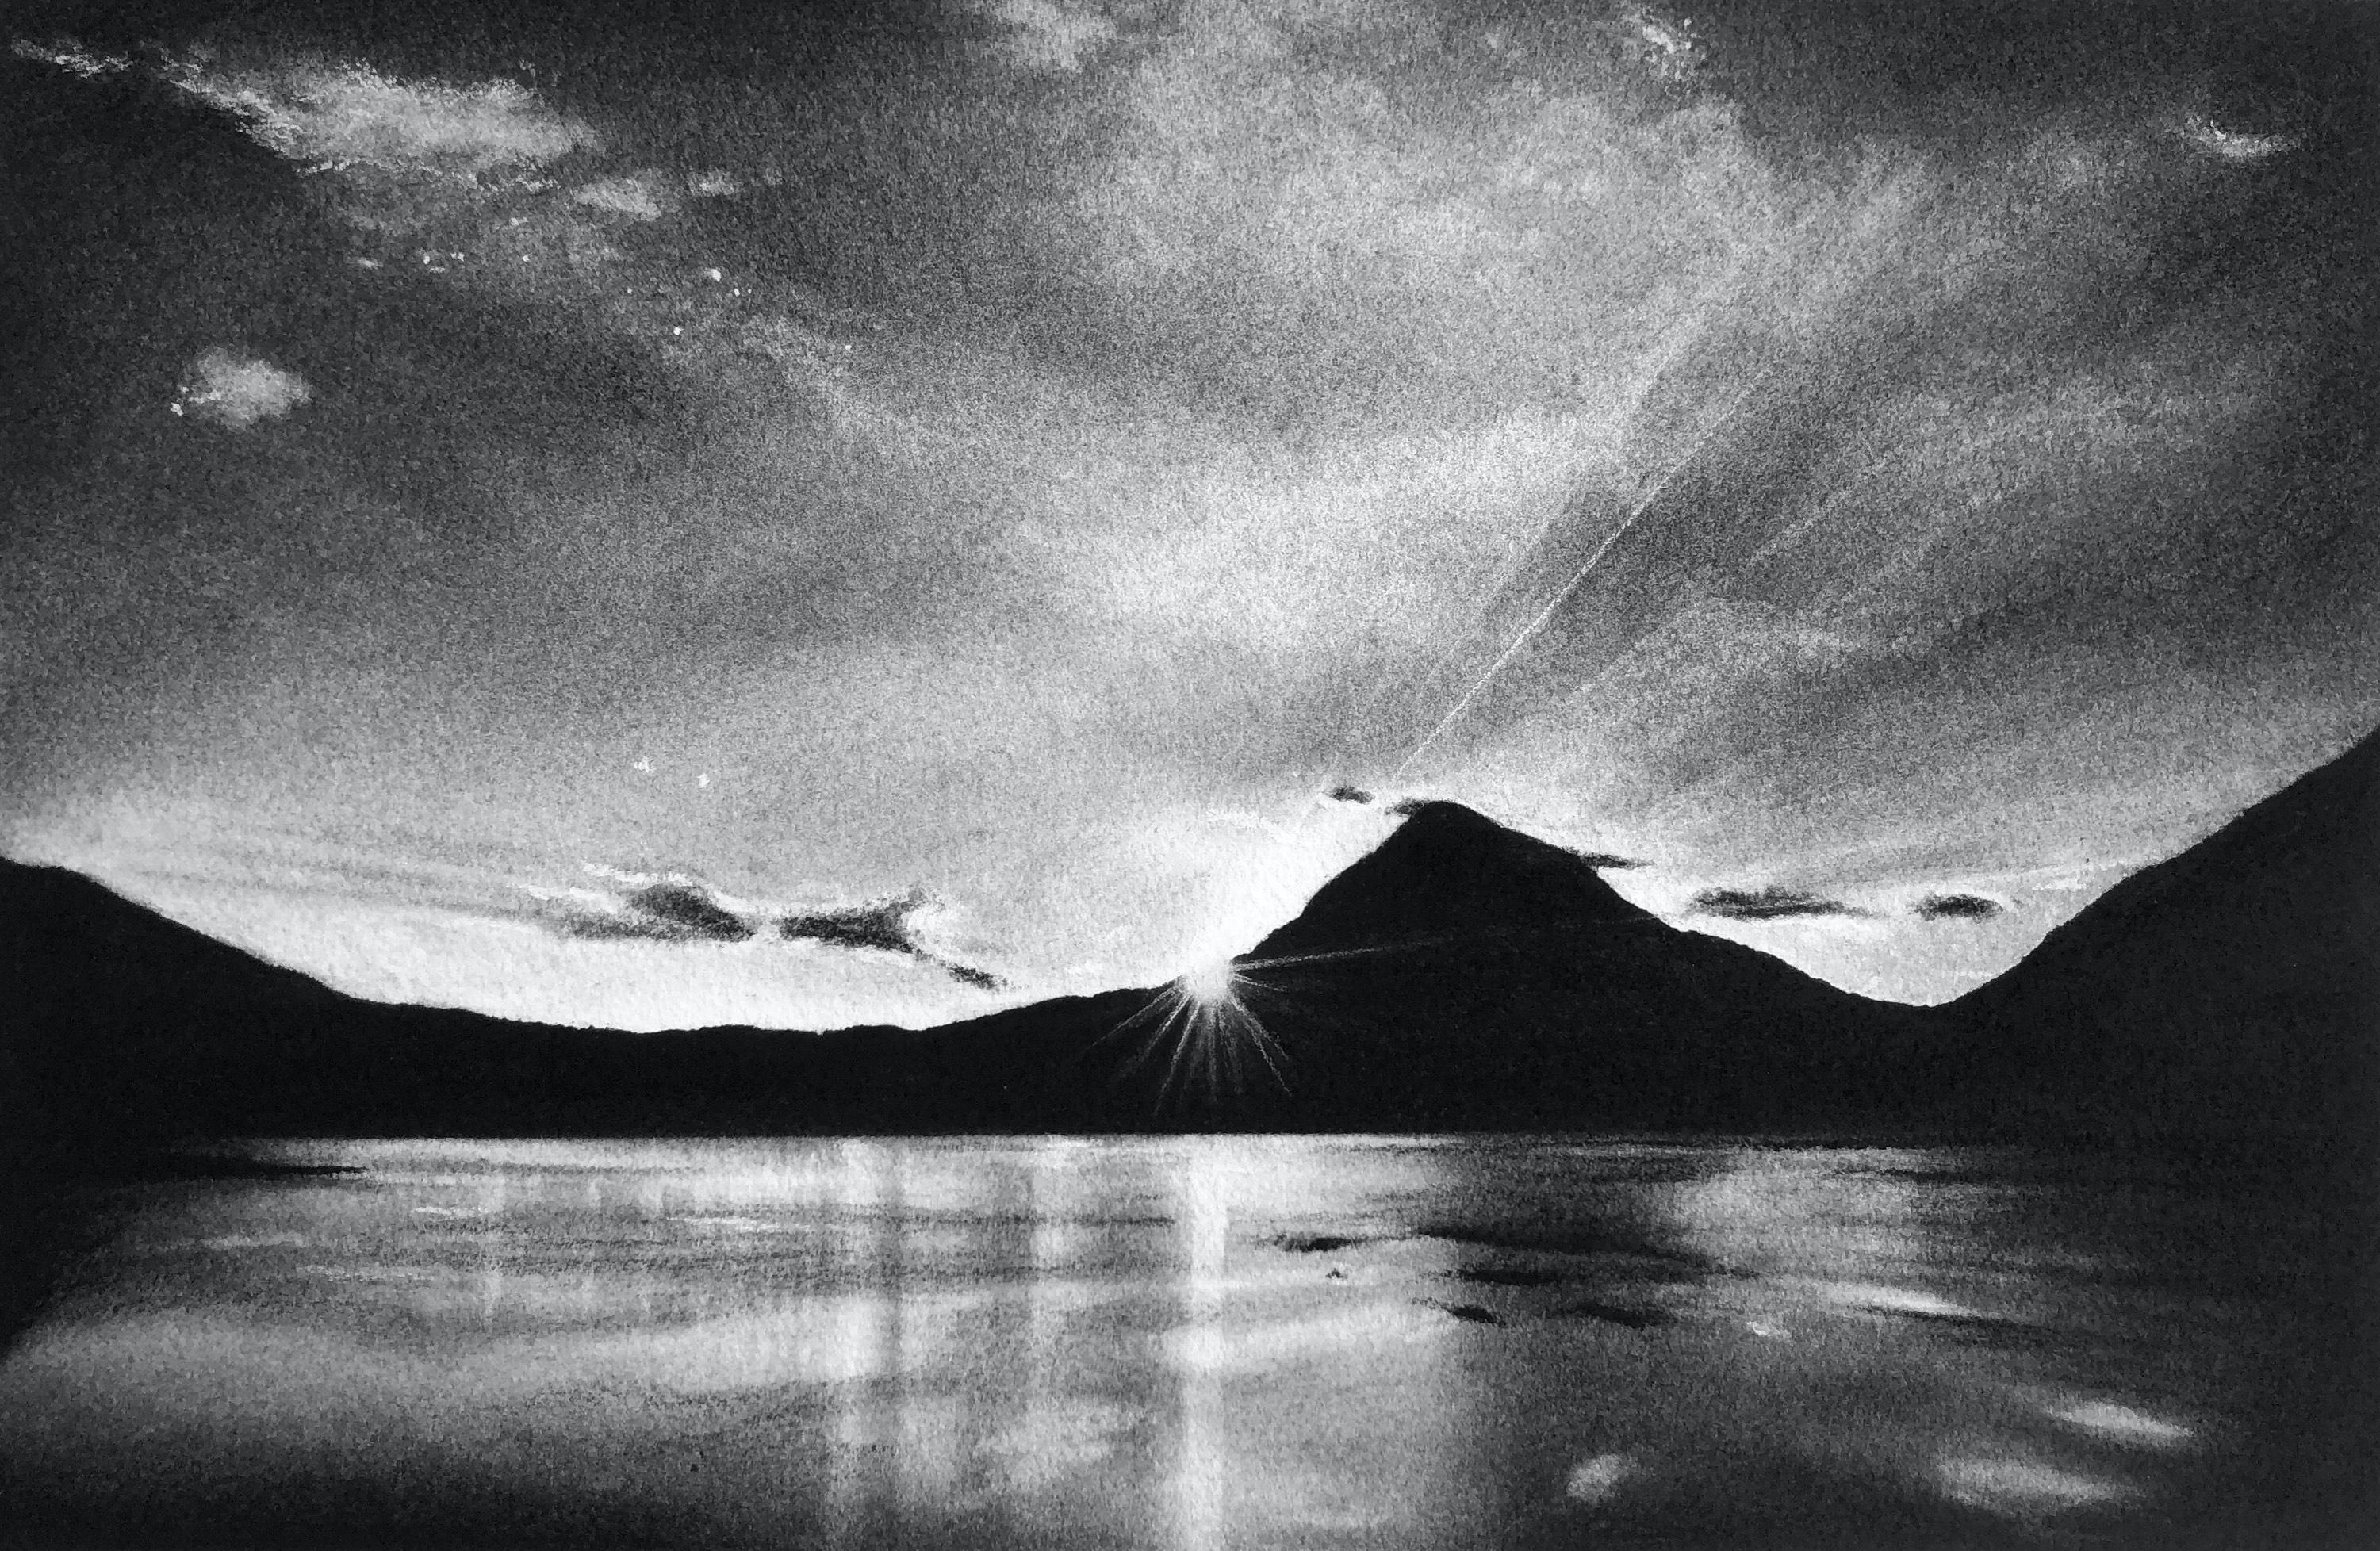 Sunrise at Mount Fuji, black and white charcoal drawing of mountains in Japan